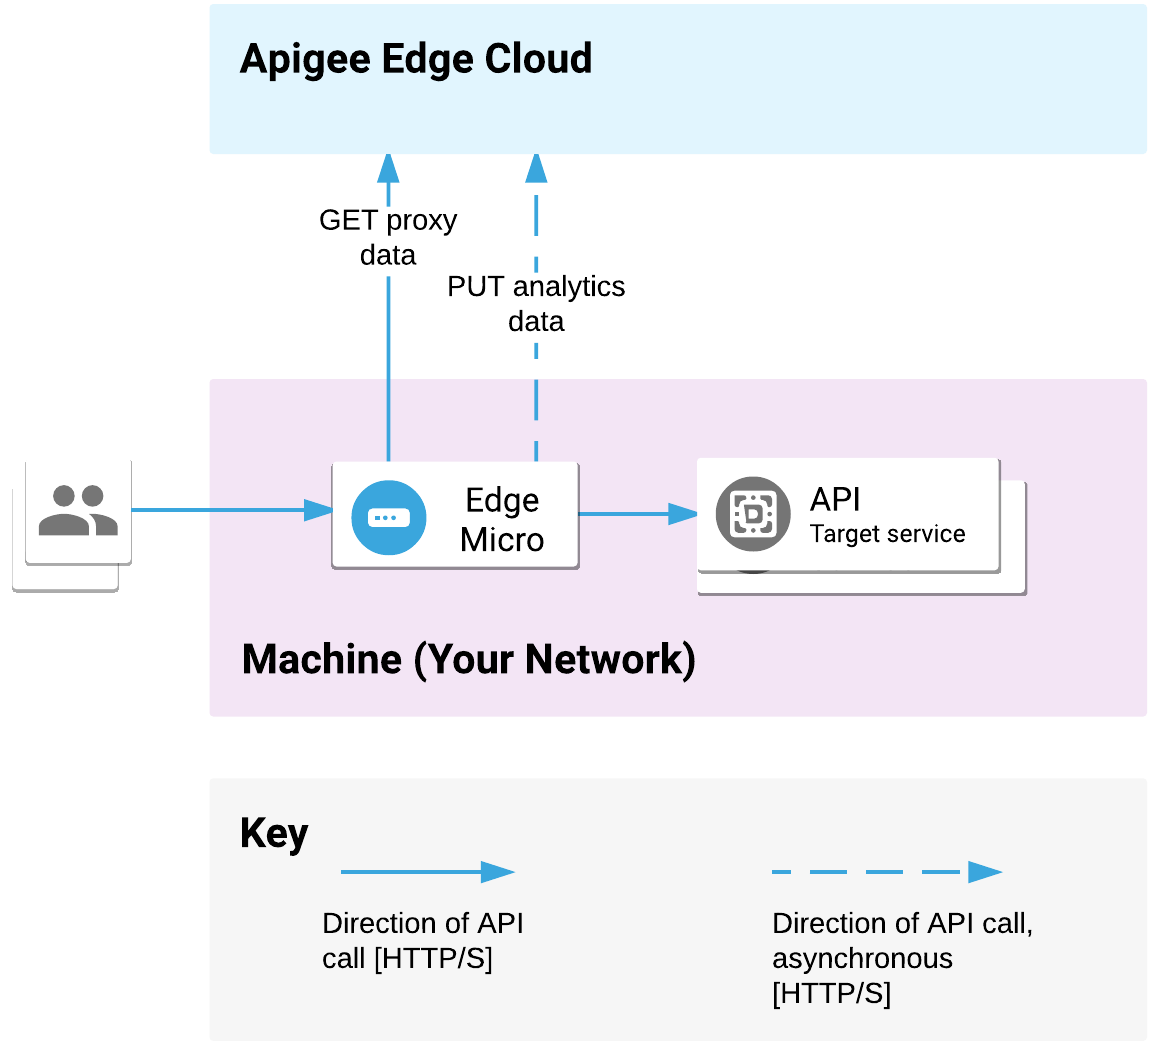 Edge microgateway is deployed on your network. It processess API requests
             from clients and calls target services. The microgateway communicates proxy and
             analytics data
             with Apigee Edge Cloud.